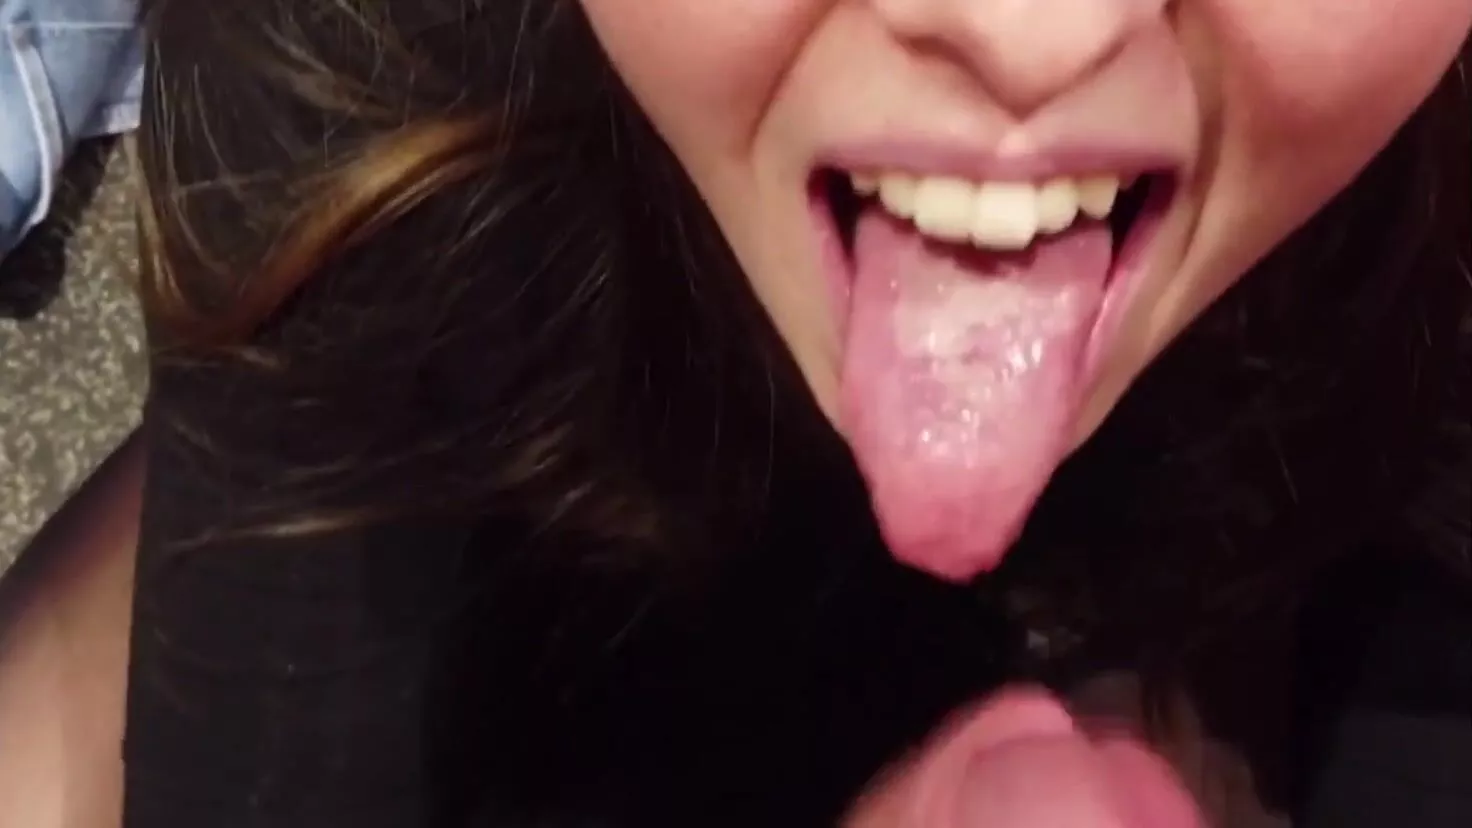 Amateur lickmylucy enjoys to give handjob and getting cum on her tongue ???? pic